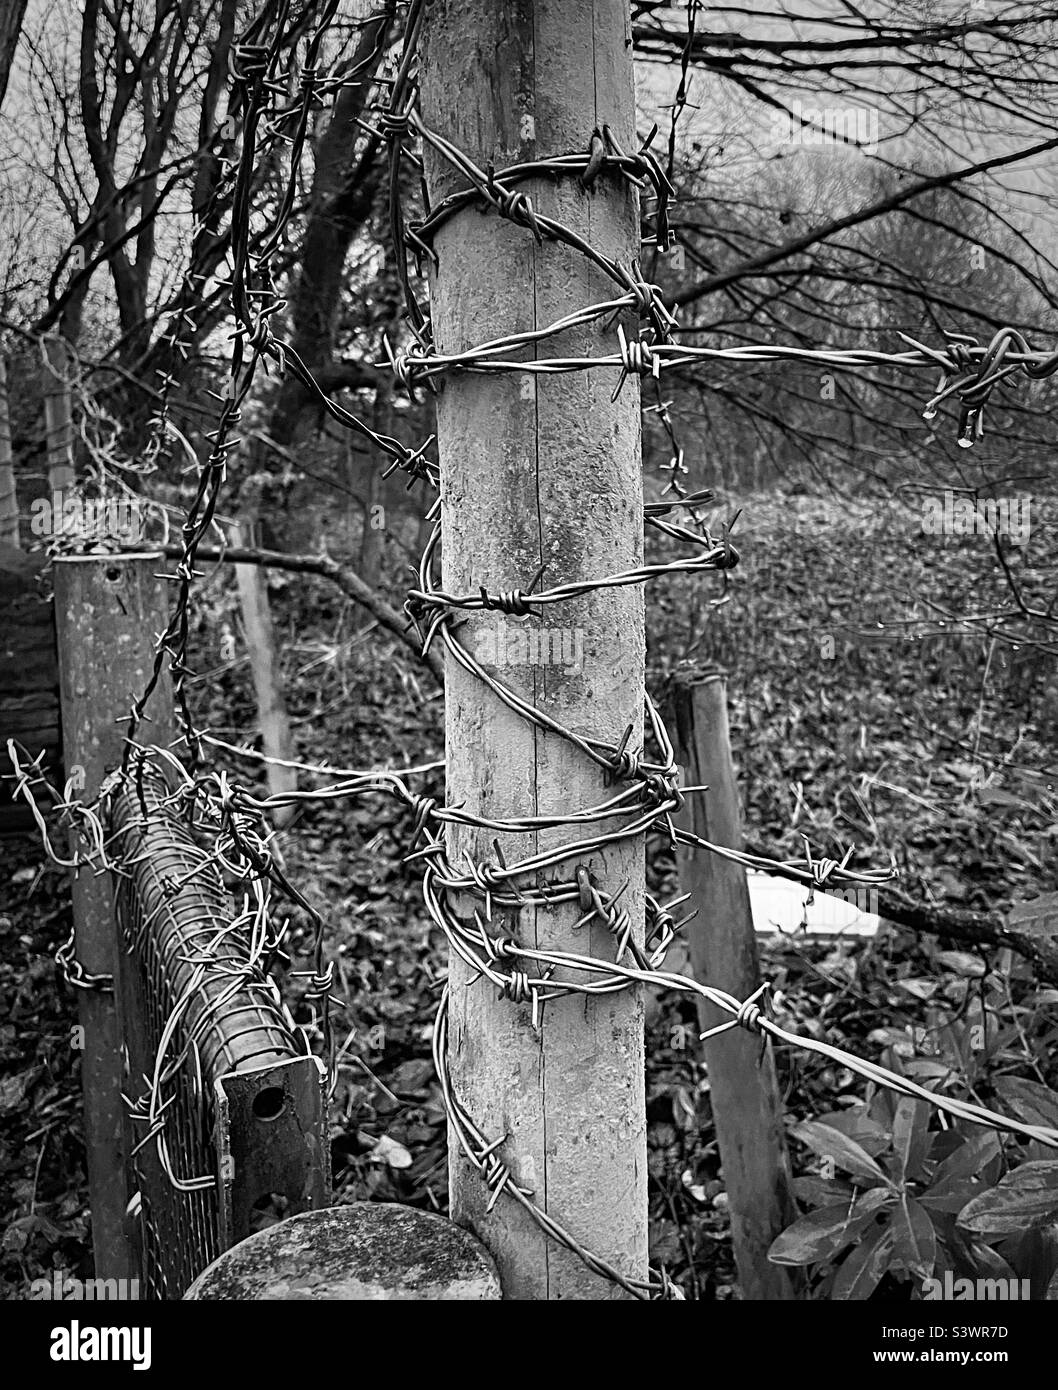 ‘KEEP OUT’ sharp barbed wire fencing surrounds the perimeter of farmland making it clear that no unauthorised access is welcome (Black & White) Stock Photo